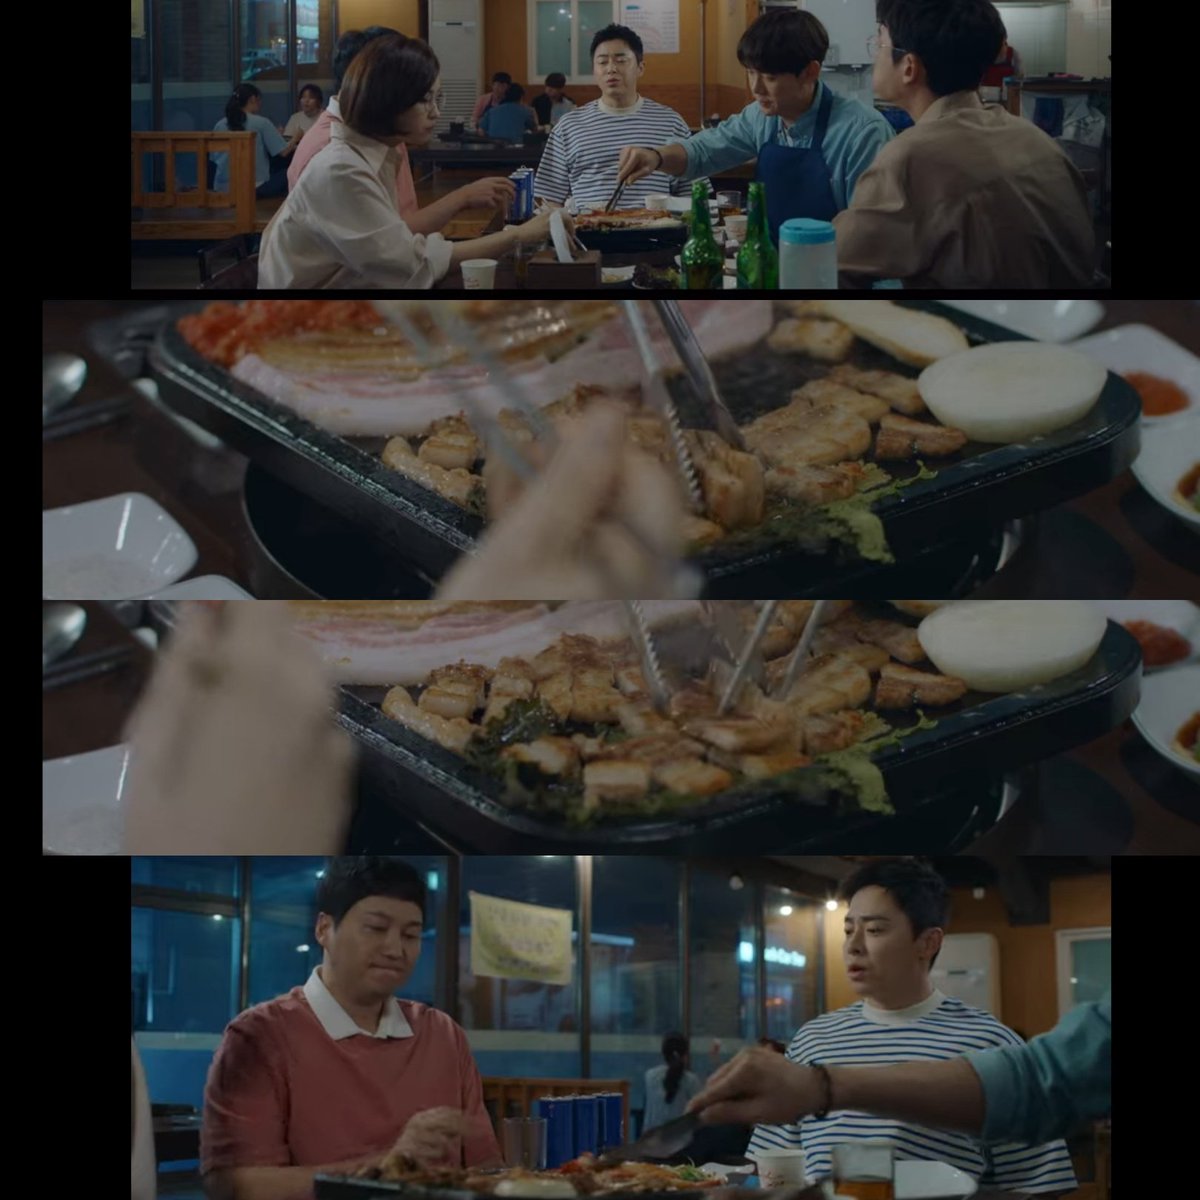 Jungwon is attentive but he's extra attentive with Songhwa. He pays attention to her needs and assists her most of the time. This is perfectly and subtlety portrayed when they eat out. #HospitalPlaylist  #슬기로운의사생활  #송화  #정원  #전미도  #유연석  #JeonMido  #YooYeonSeok